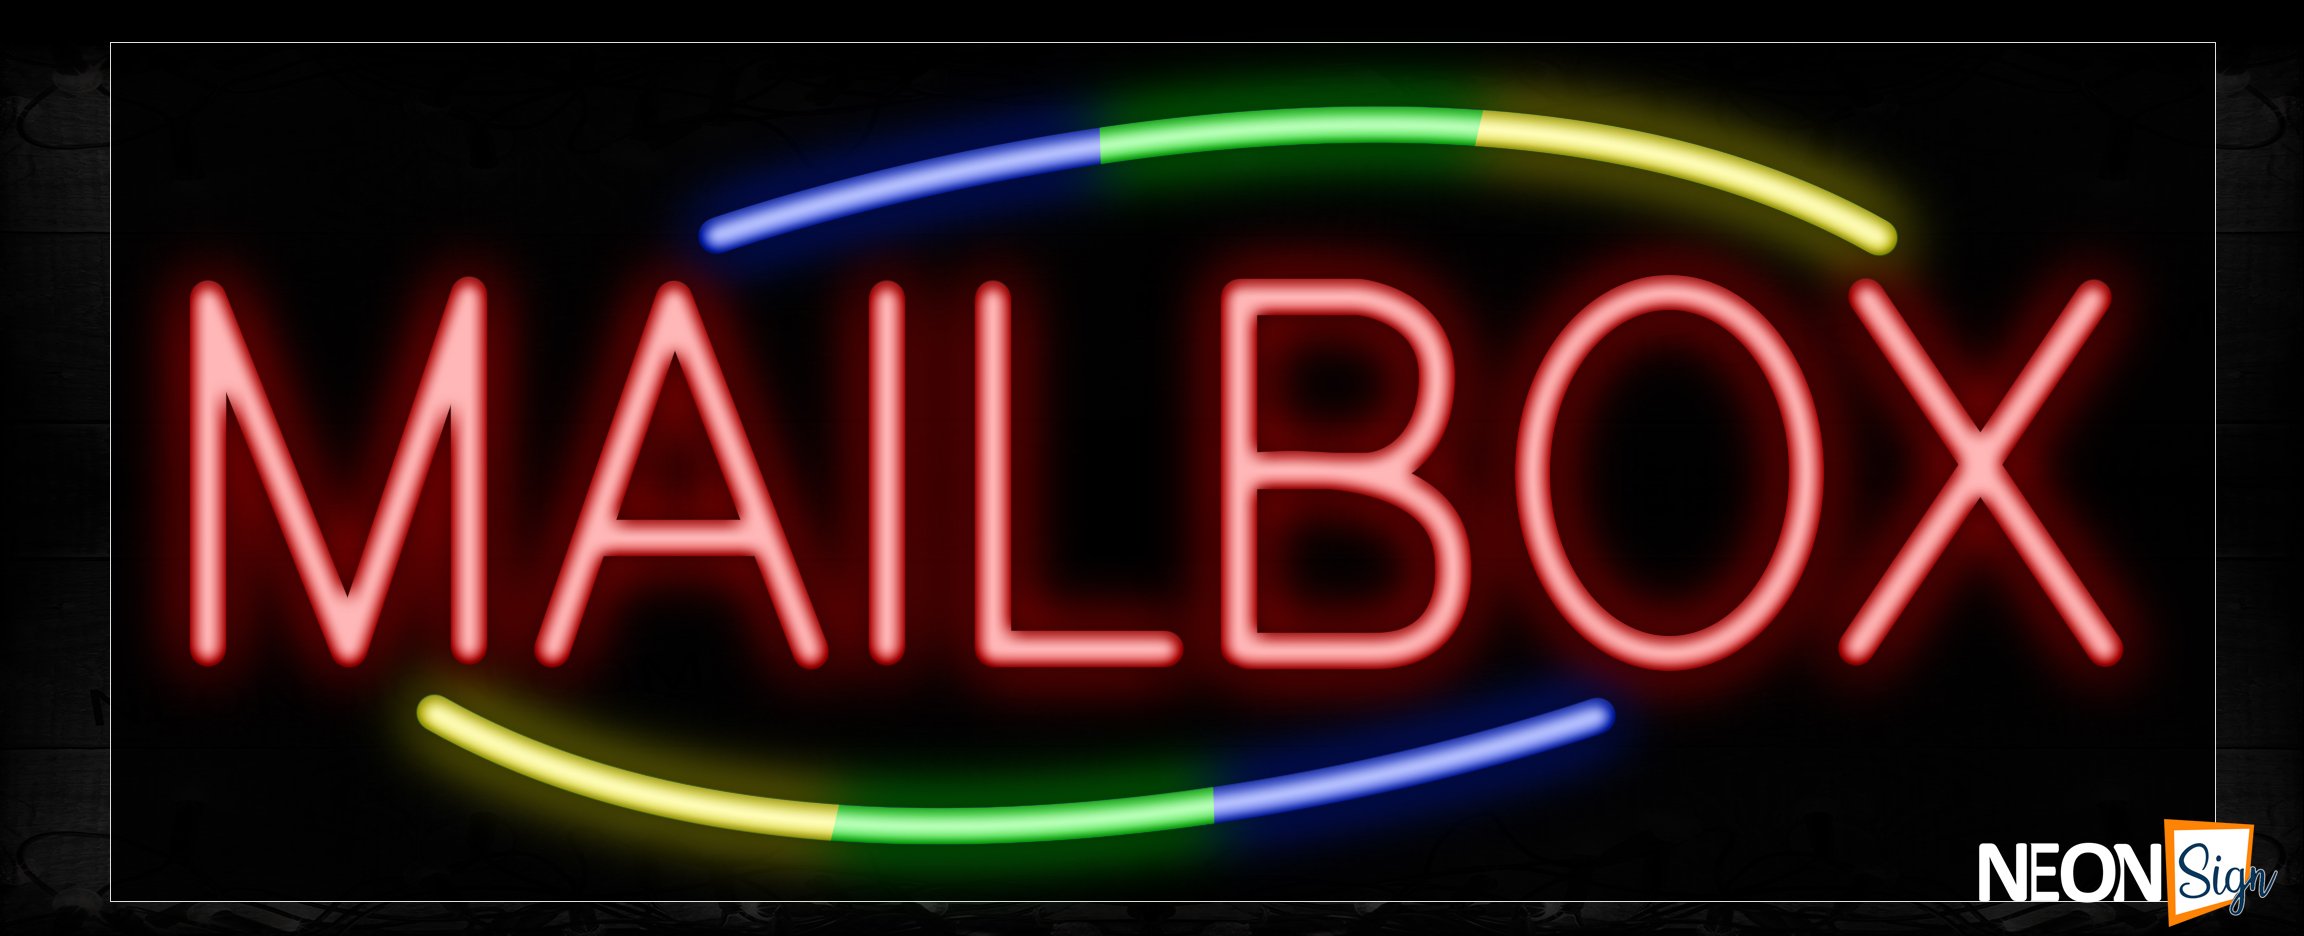 Image of Mailbox In Red With Colorful Arc Border Neon Sign